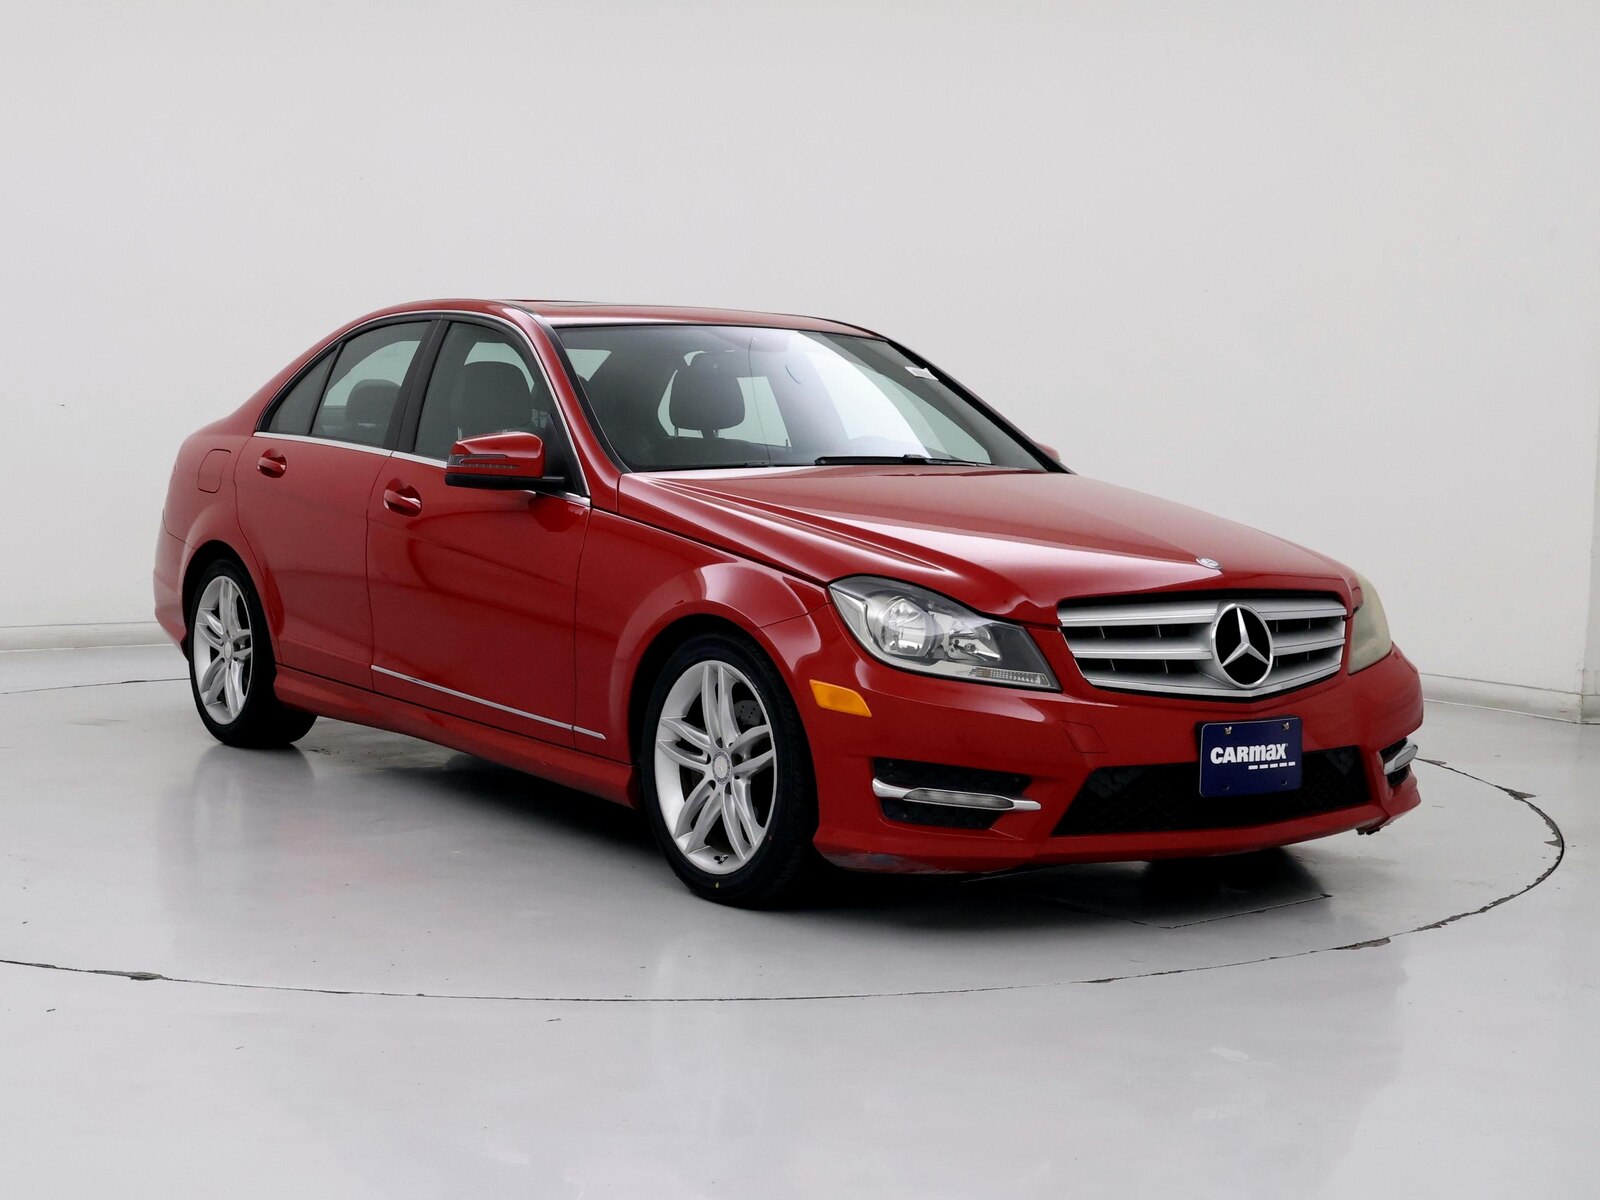 Used 2013 Mercedes-Benz C-Class C250 Sport with VIN WDDGF4HB9DR274301 for sale in Kenosha, WI